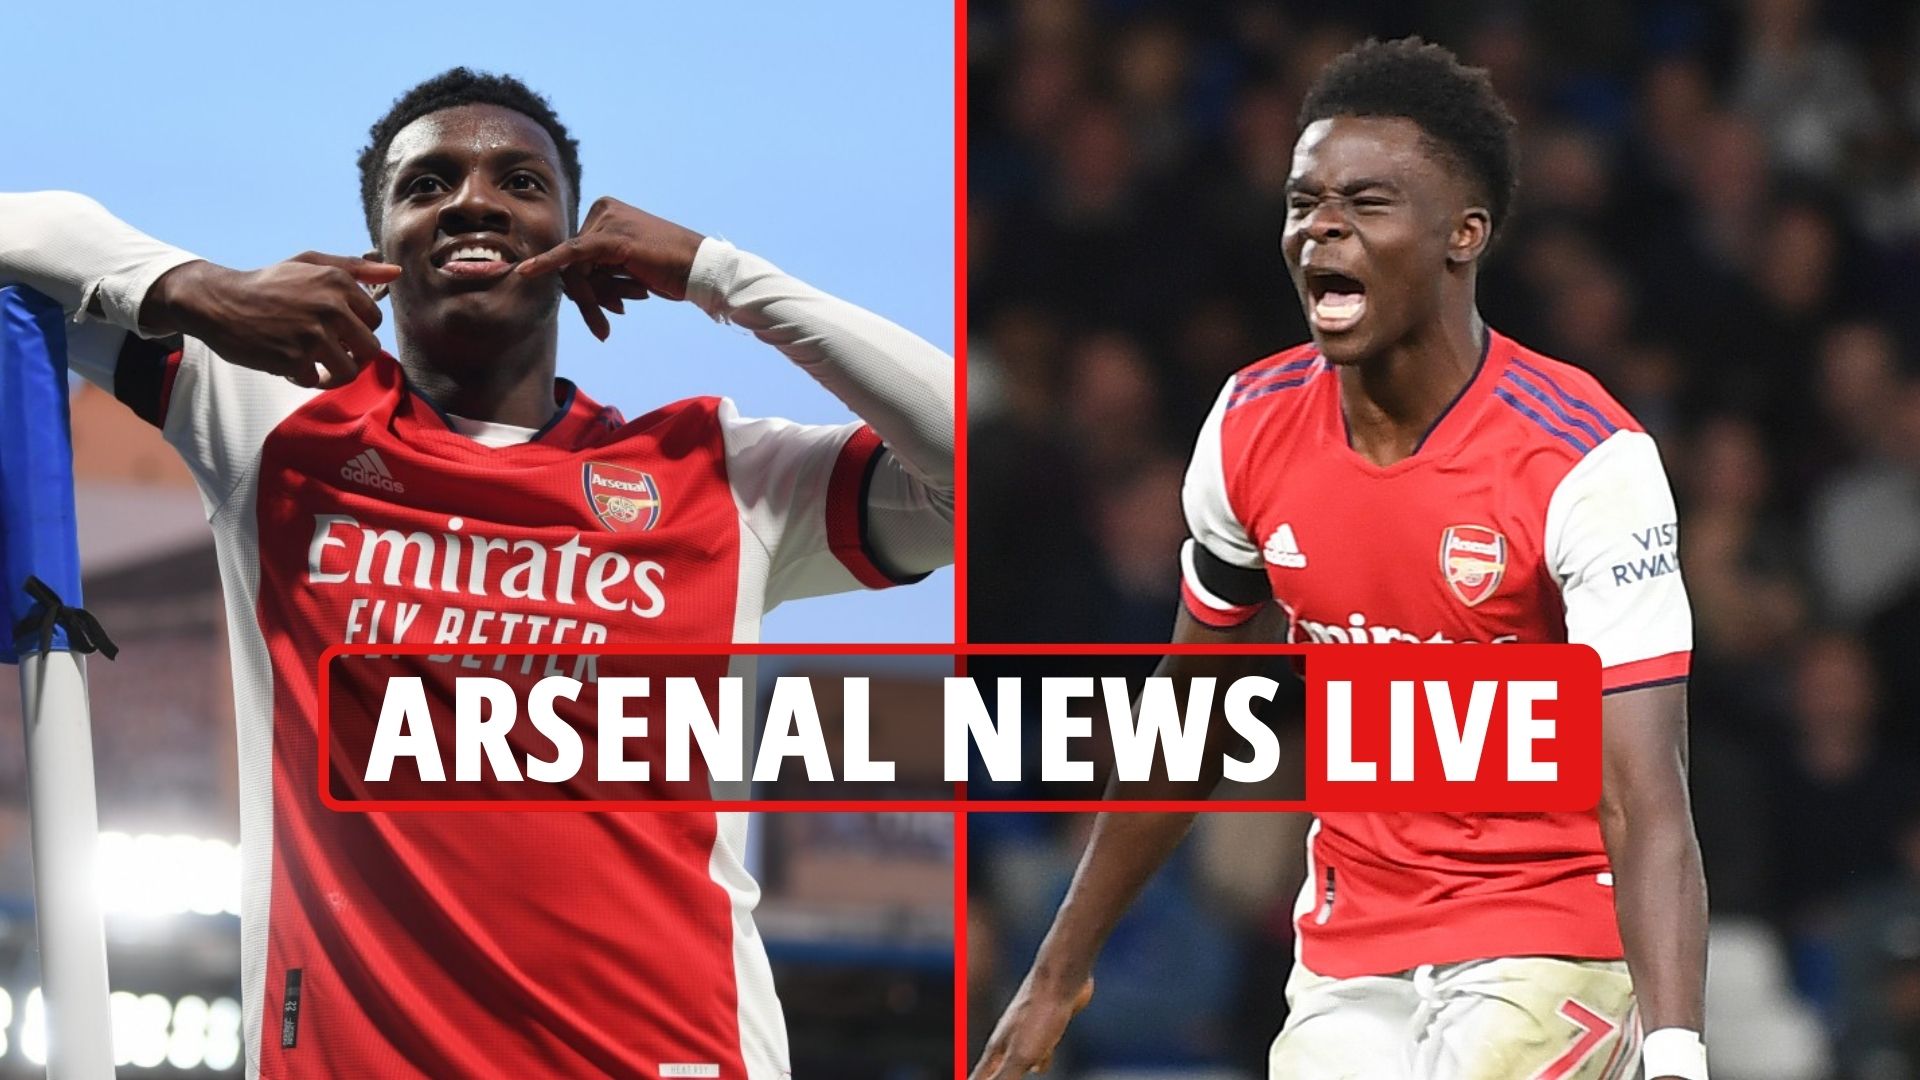 Arsenal news LIVE: Latest transfer news and updates from the Emirates